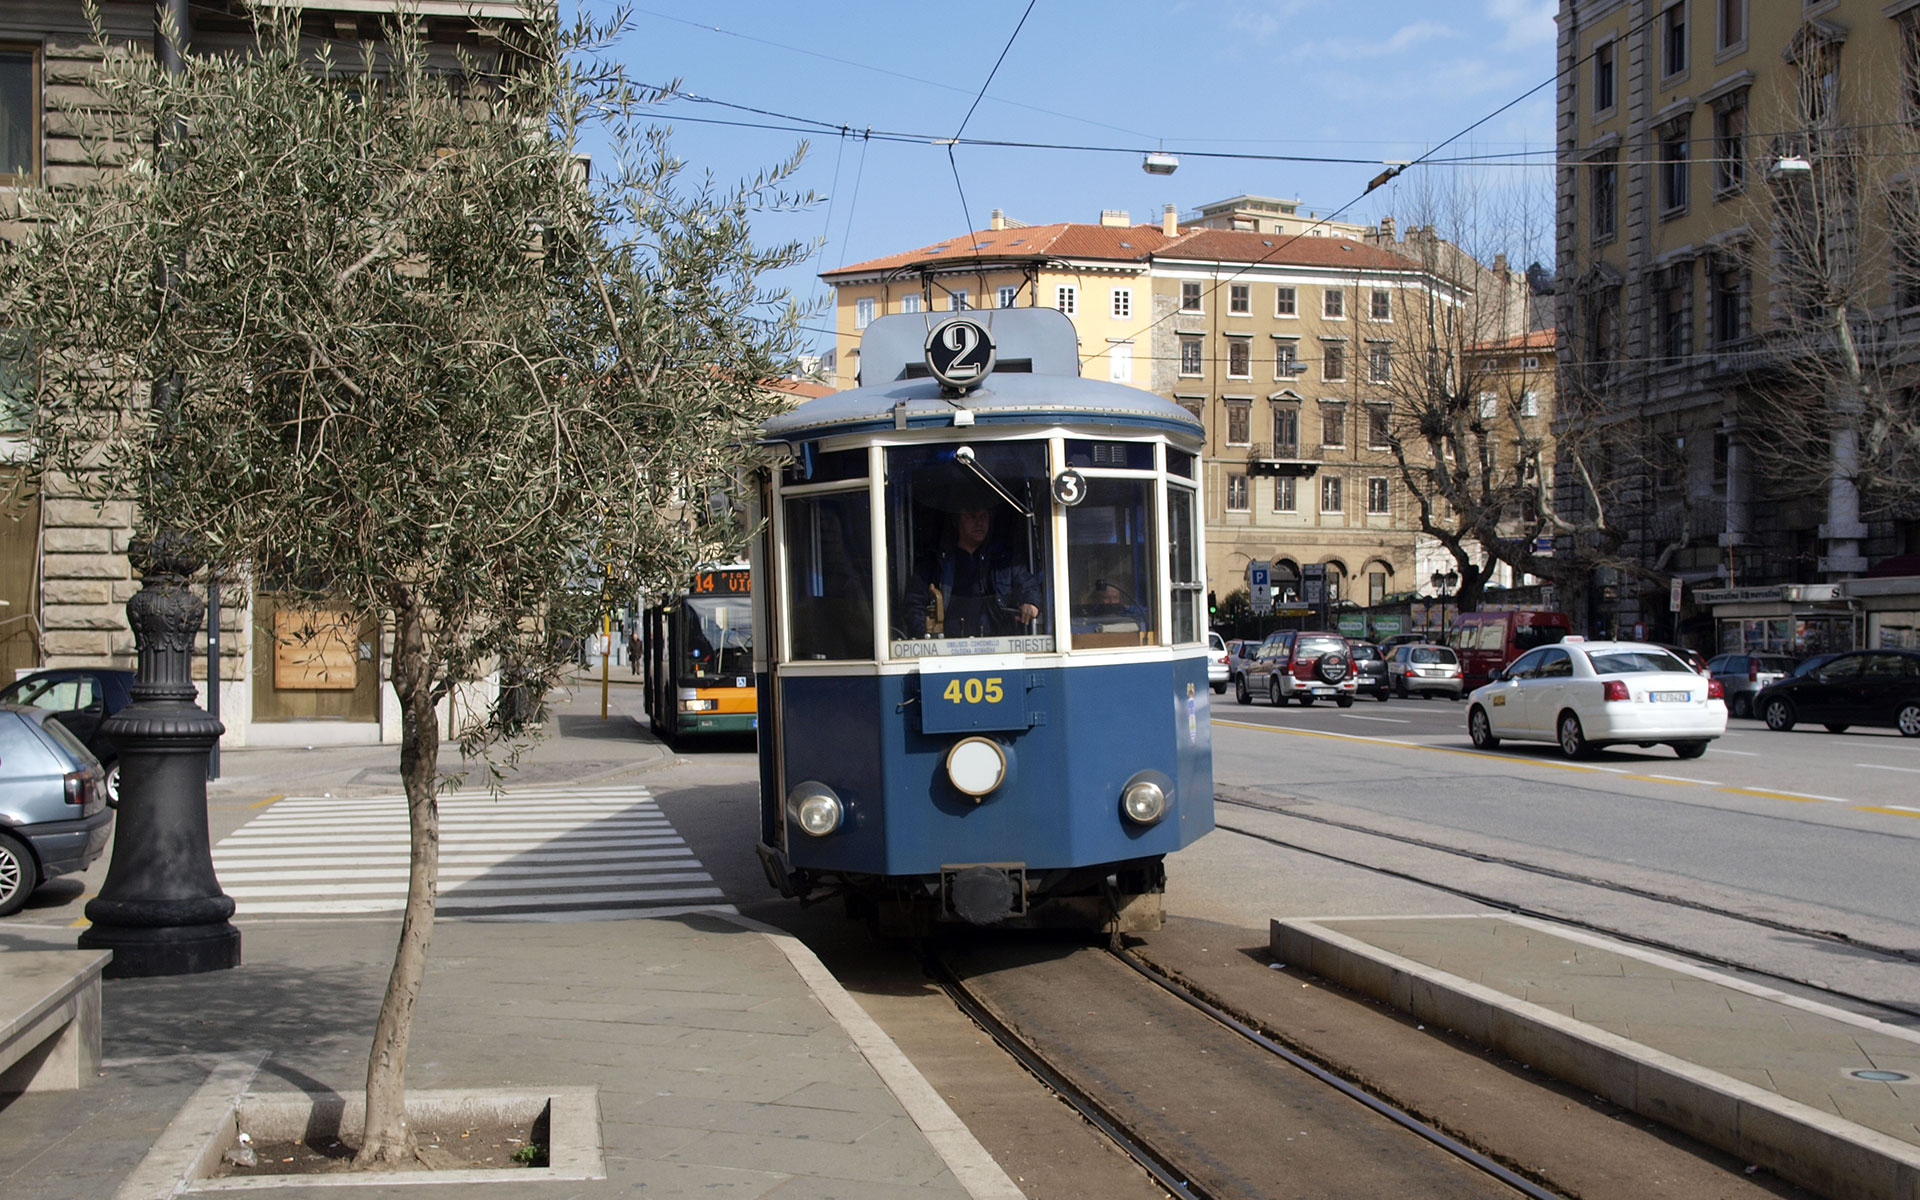 Tram line 2 connects Trieste with Villa Opicina (photo © hidden europe).